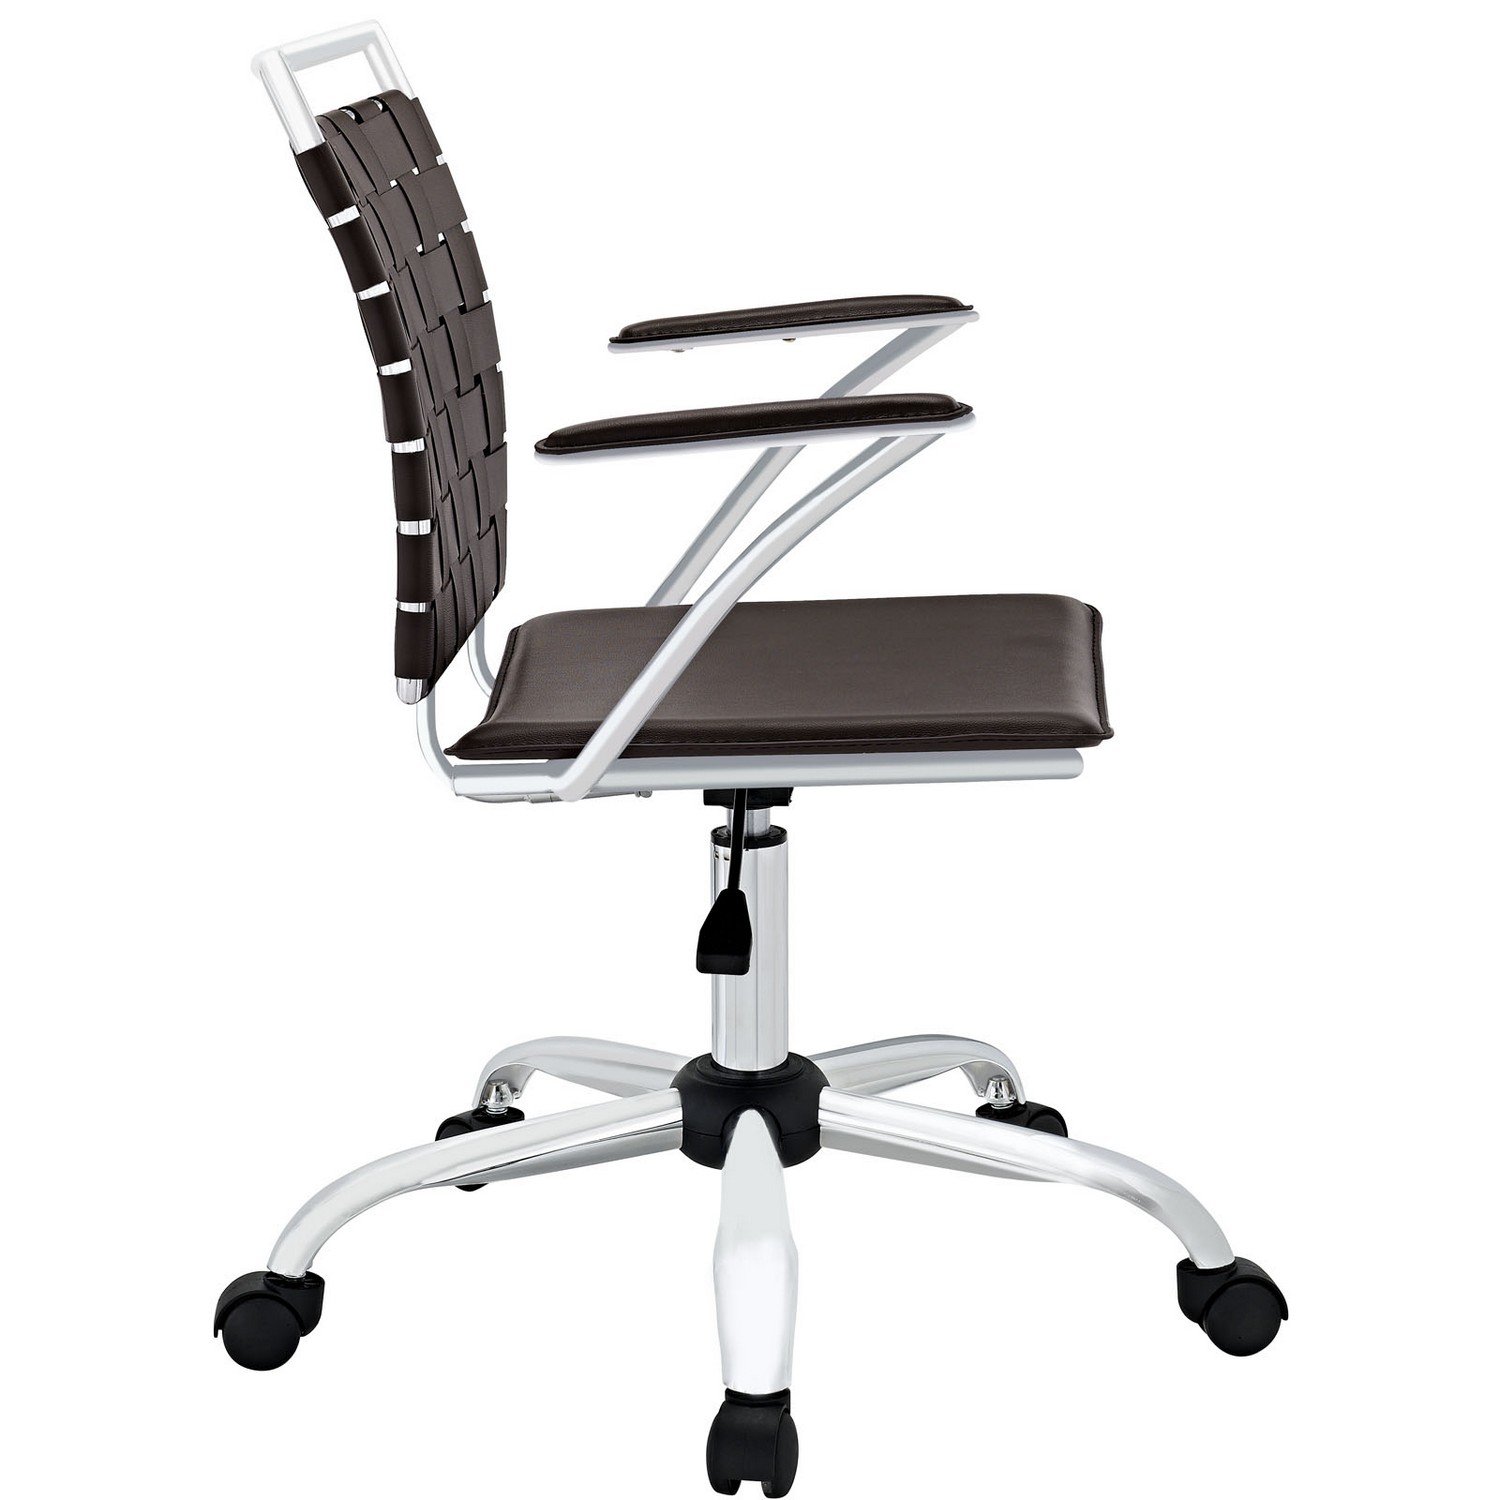 Modway Fuse Office Chair - Brown